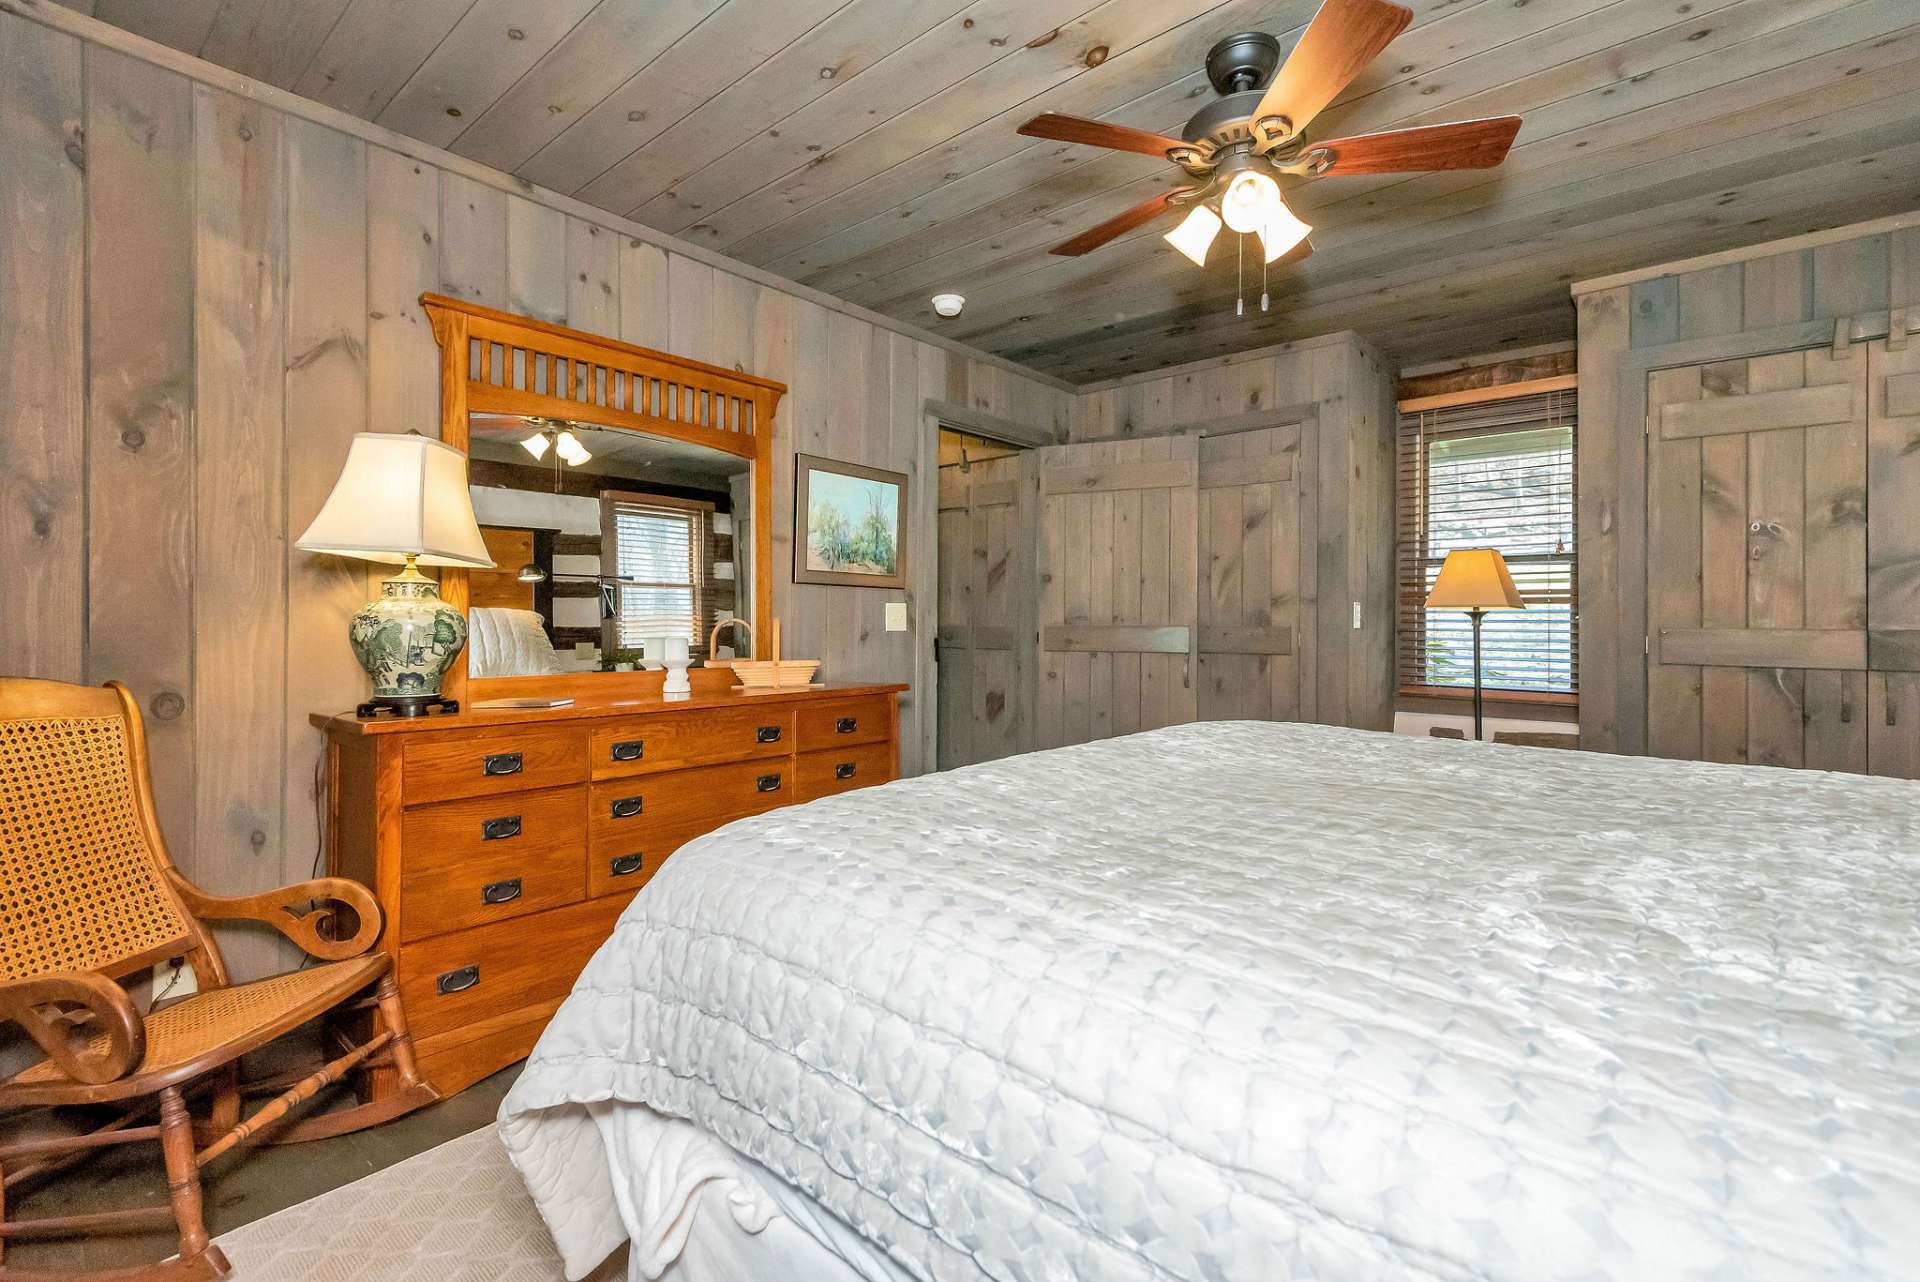 Designed with rustic charm and comfort in mind, the primary bedroom features warm wood, cozy furnishings, and soft textiles that create a welcoming and inviting atmosphere.